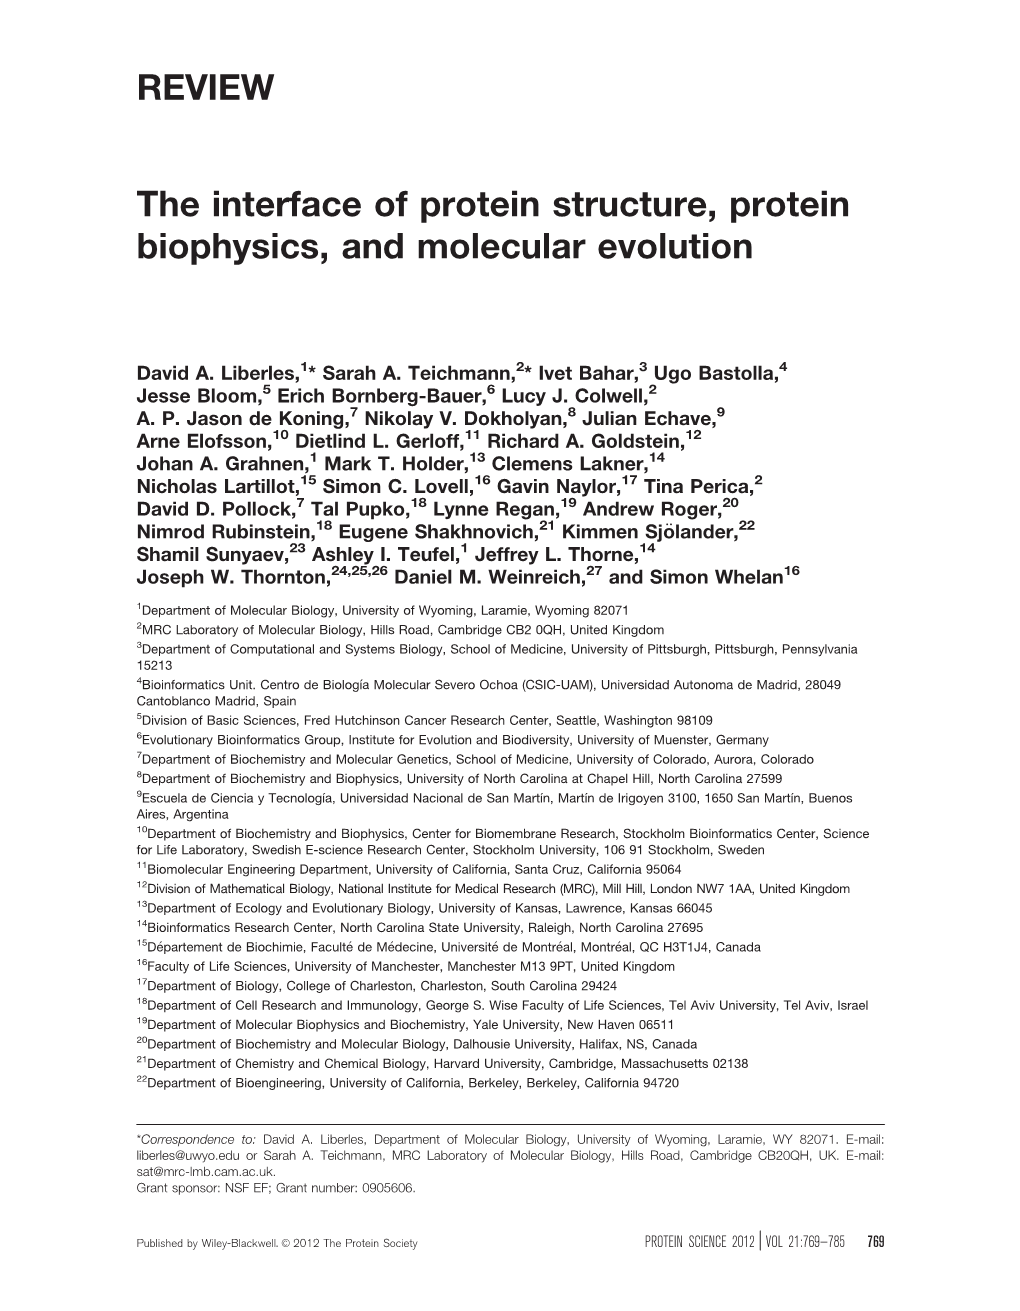 The Interface of Protein Structure, Protein Biophysics, and Molecular Evolution